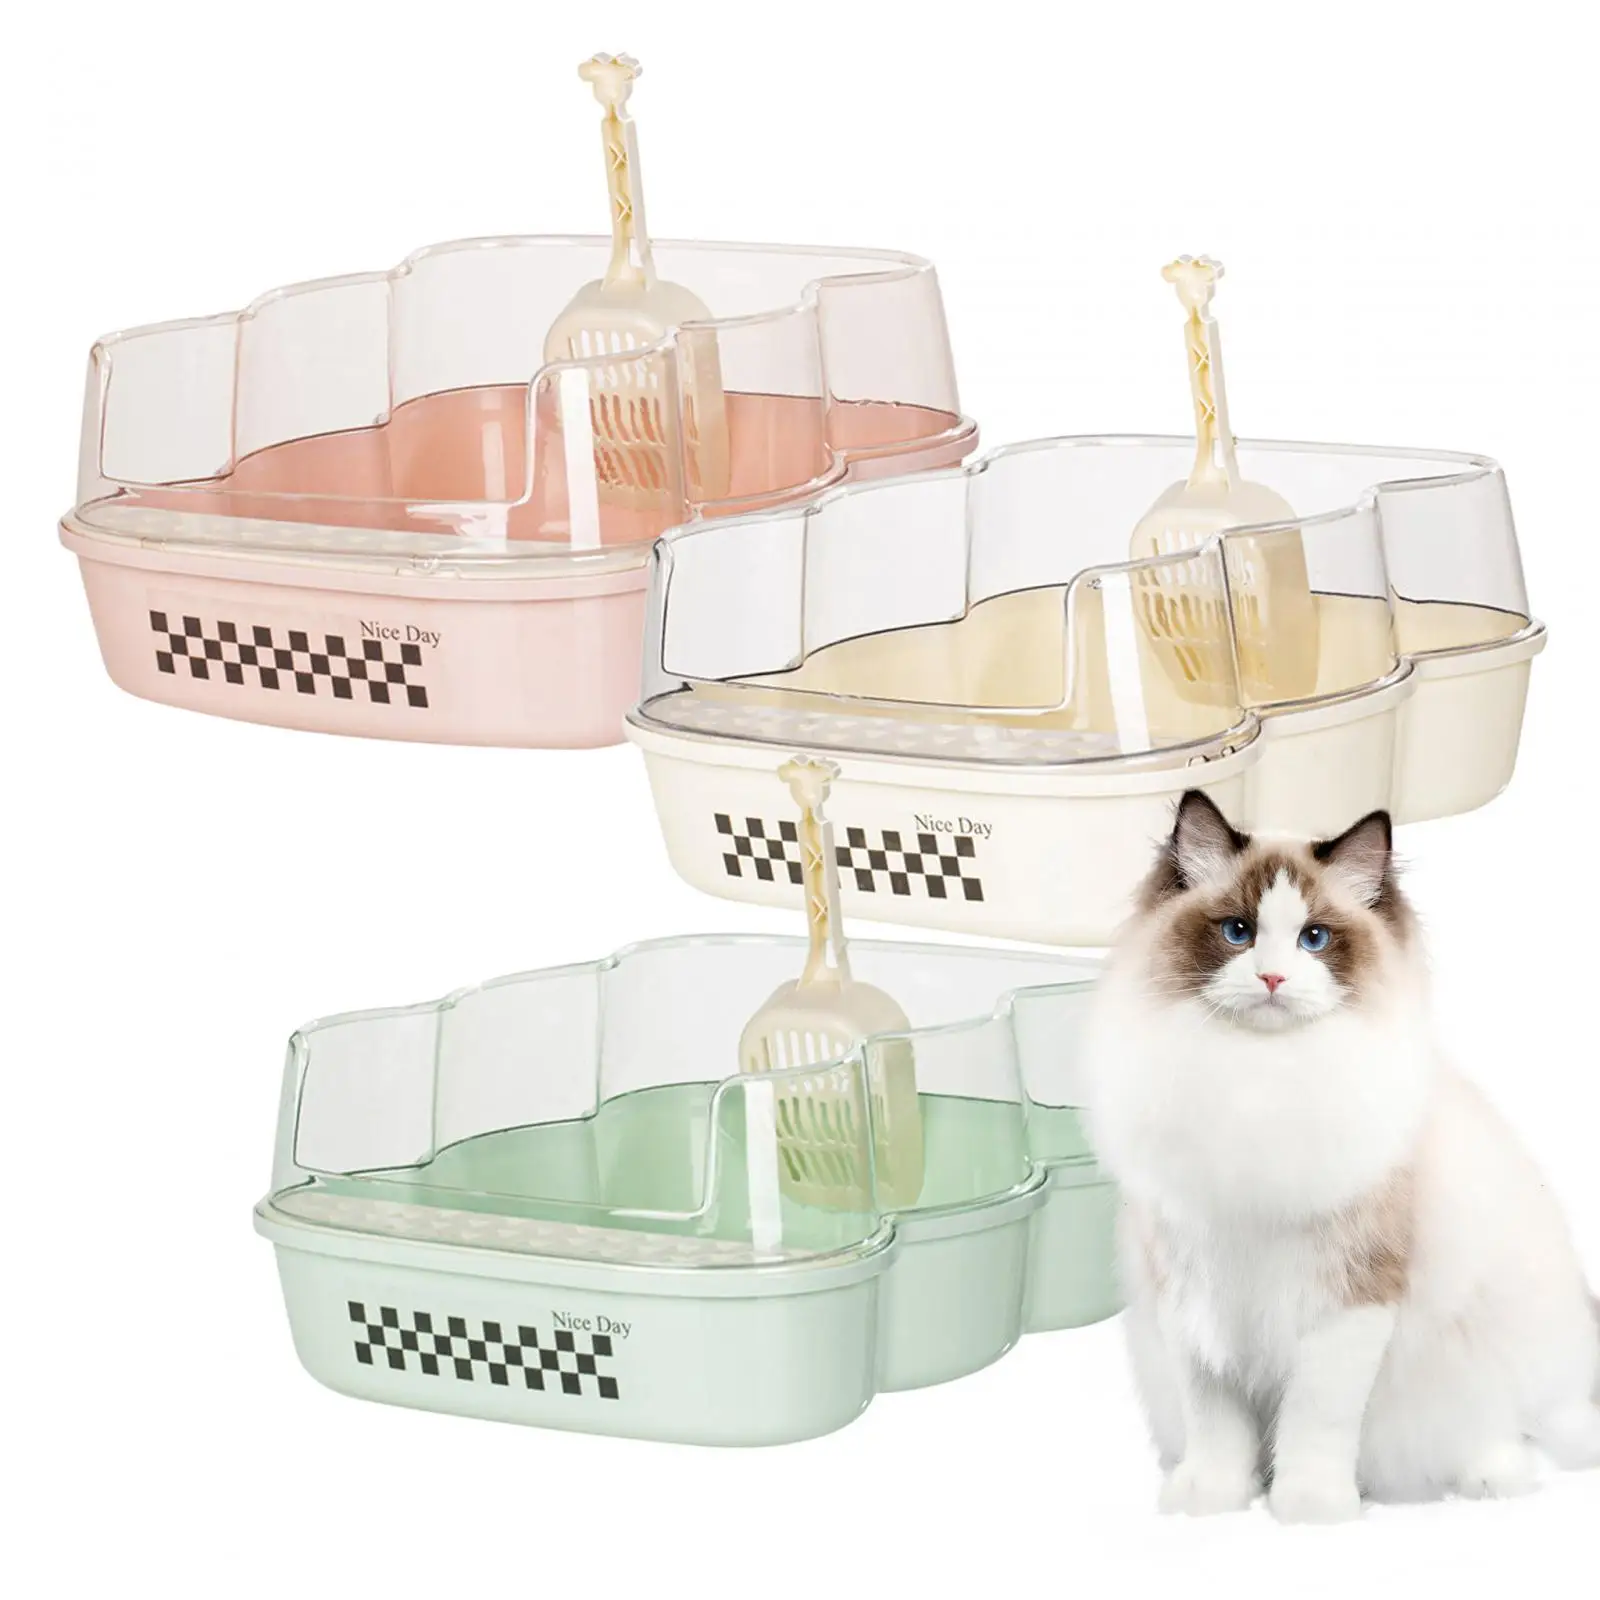 Cat Litter Box with High Side Semi Enclosed Litter Box, Durable, Easy to Clean Waterproof Cat Bedpan Kitty Litter Pan for Cat